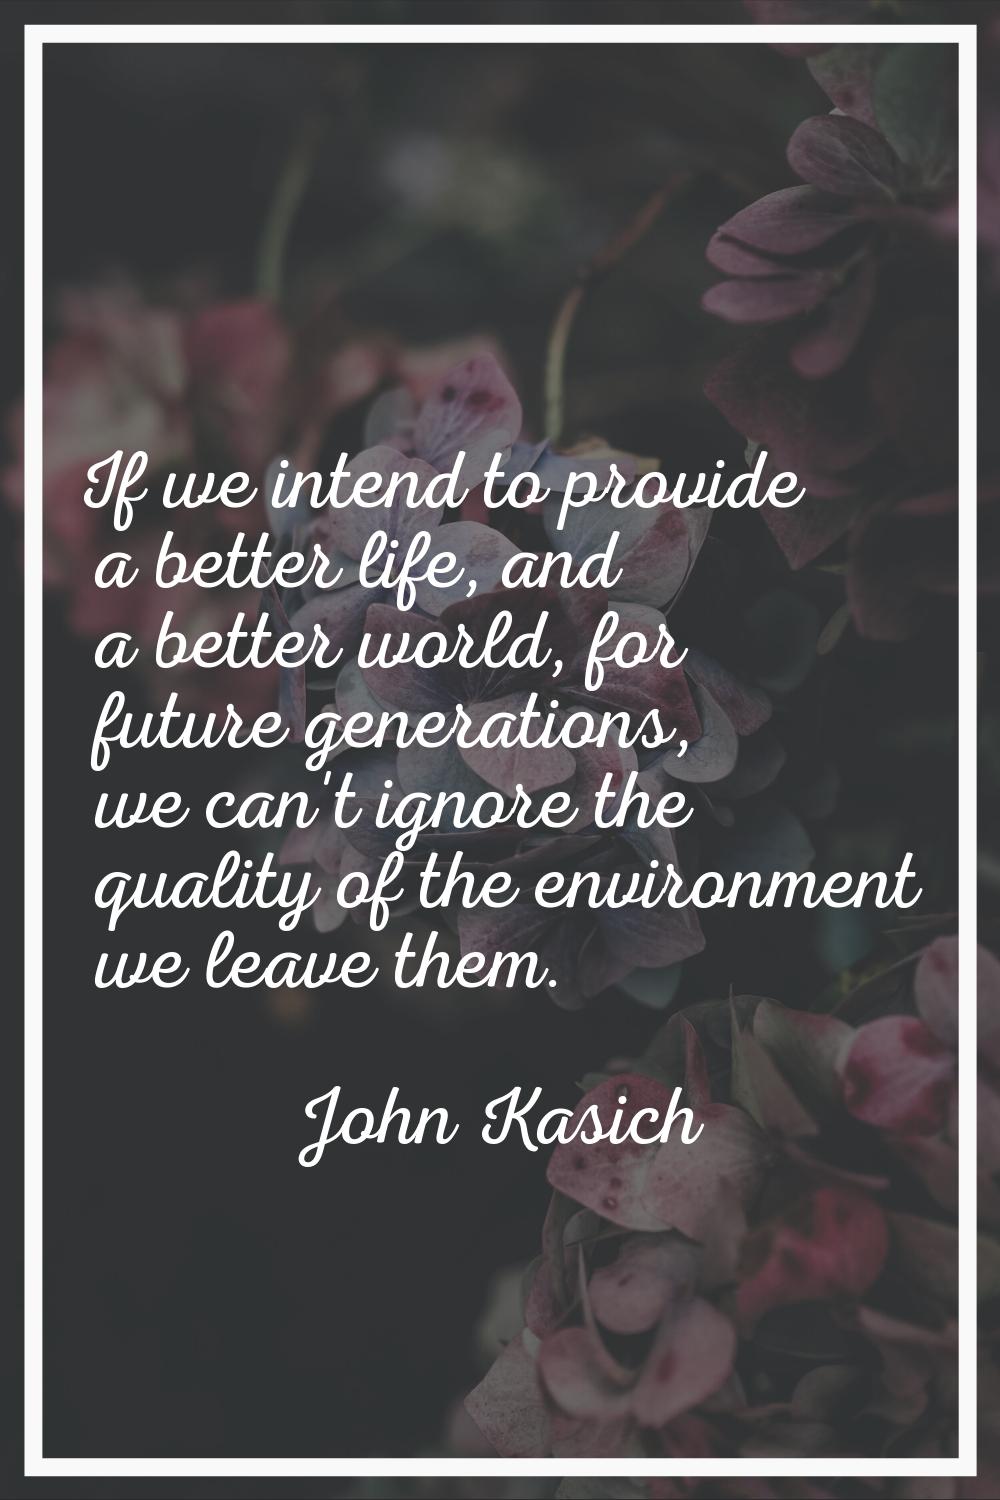 If we intend to provide a better life, and a better world, for future generations, we can't ignore 